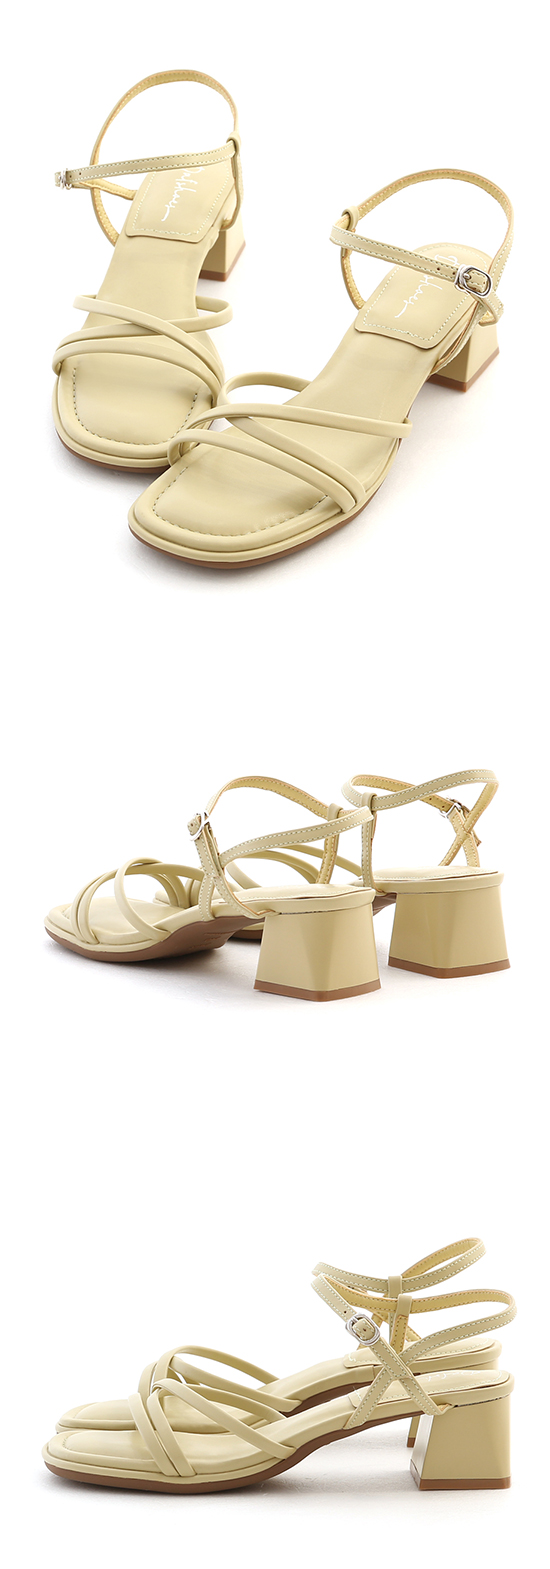 Puffy Cushioned Crossed Thin Strap Mid Heel Sandals Yellow